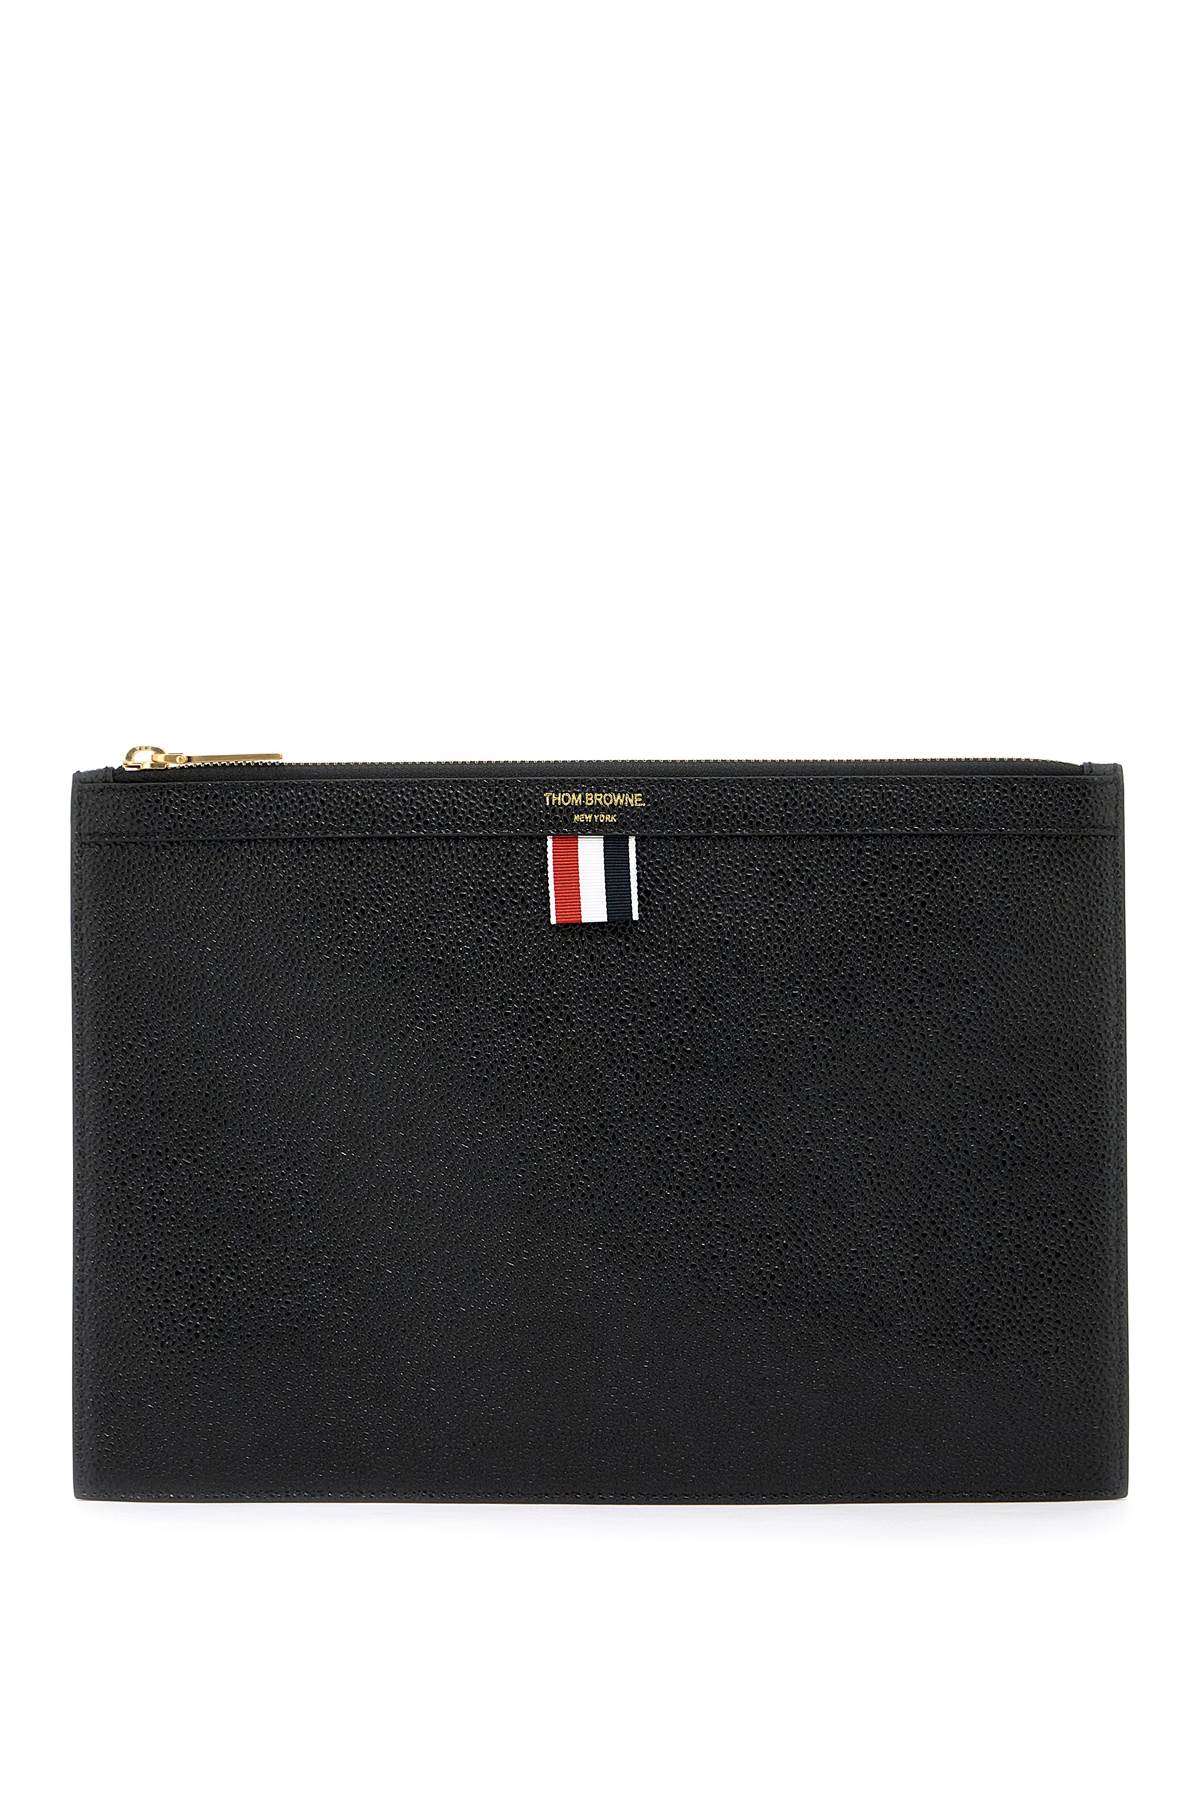 Thom Browne THOM BROWNE leather small document holder